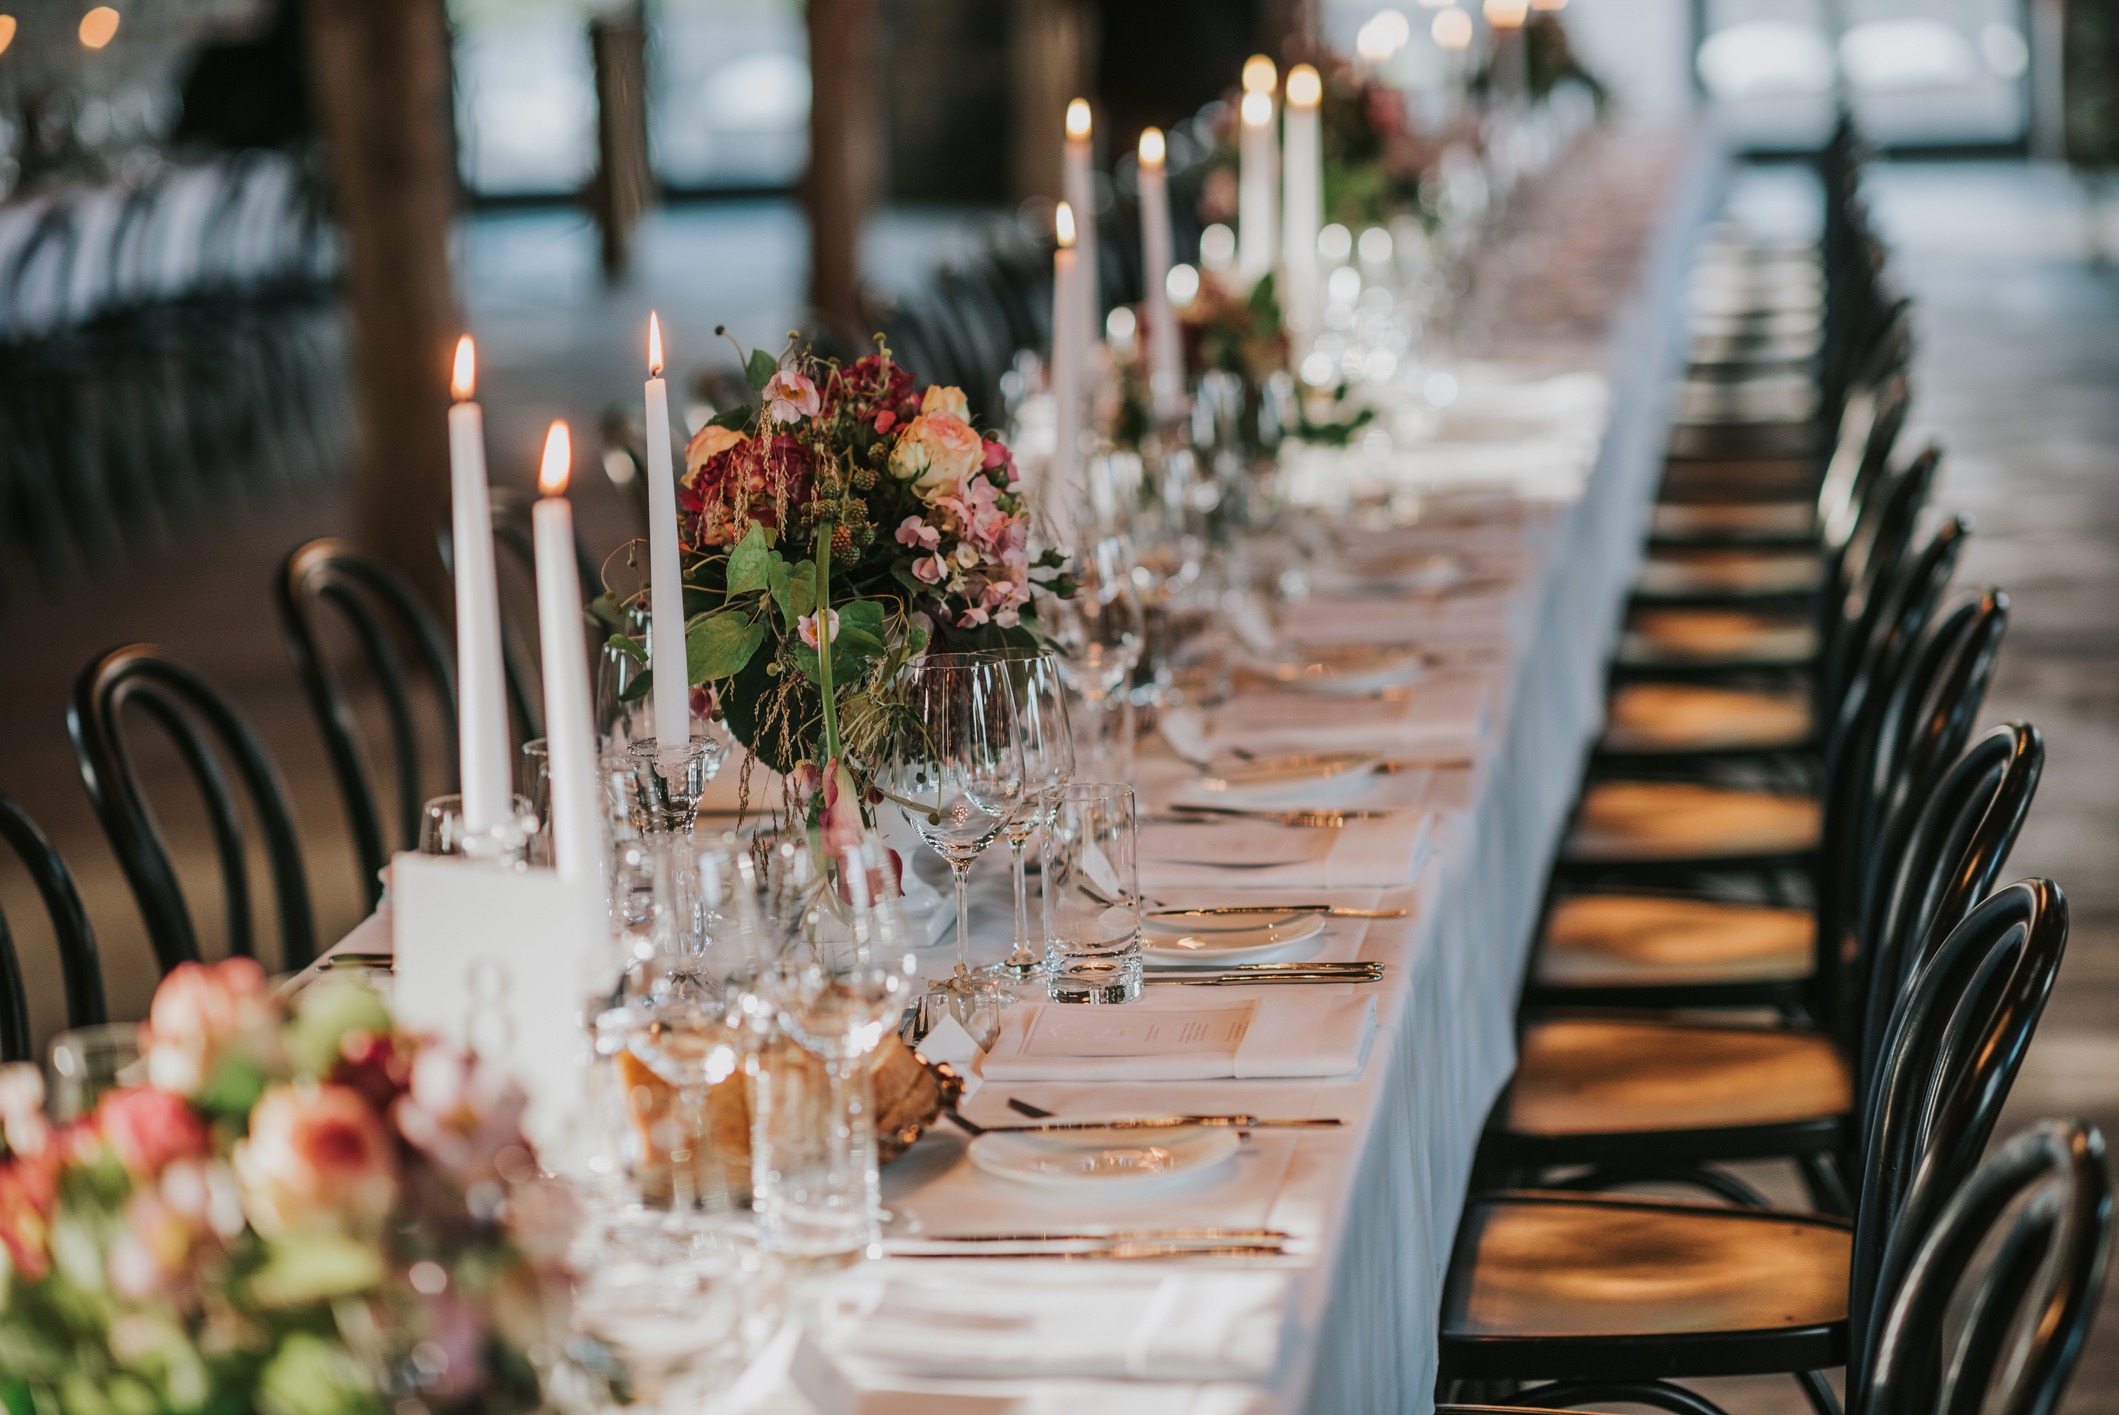 A long banquet table with tall candles and vases of flowers along the center.